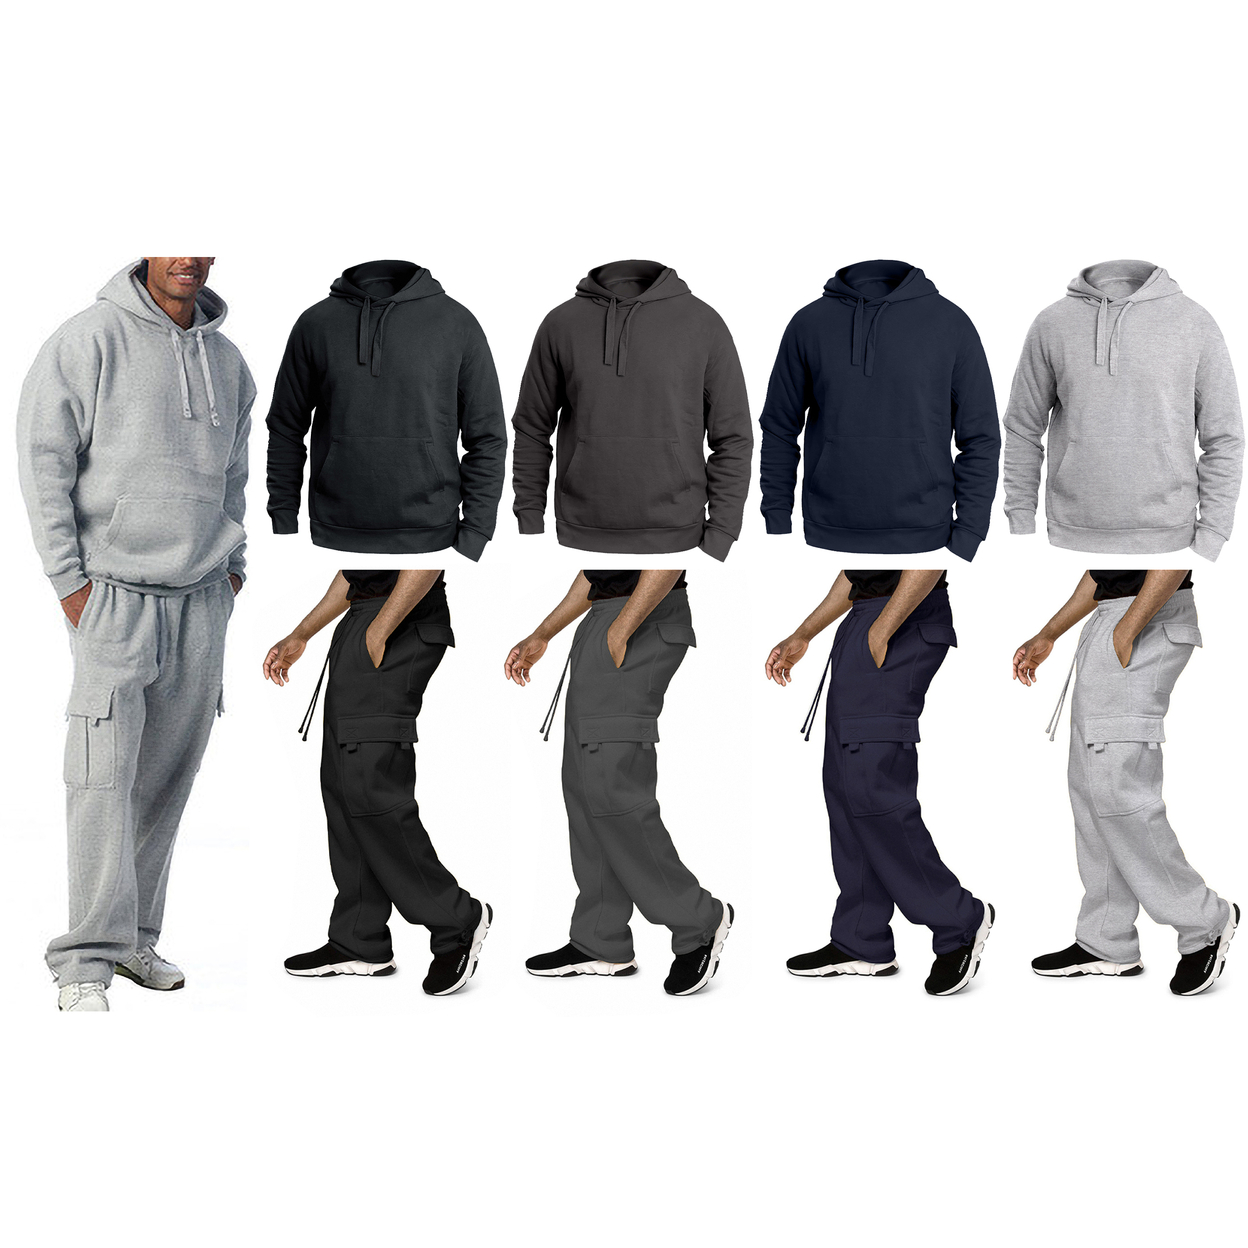 2-Pack: Men's Big & Tall Winter Warm Cozy Athletic Fleece Lined Multi-Pocket Cargo Sweatsuit - Charcoal, Large